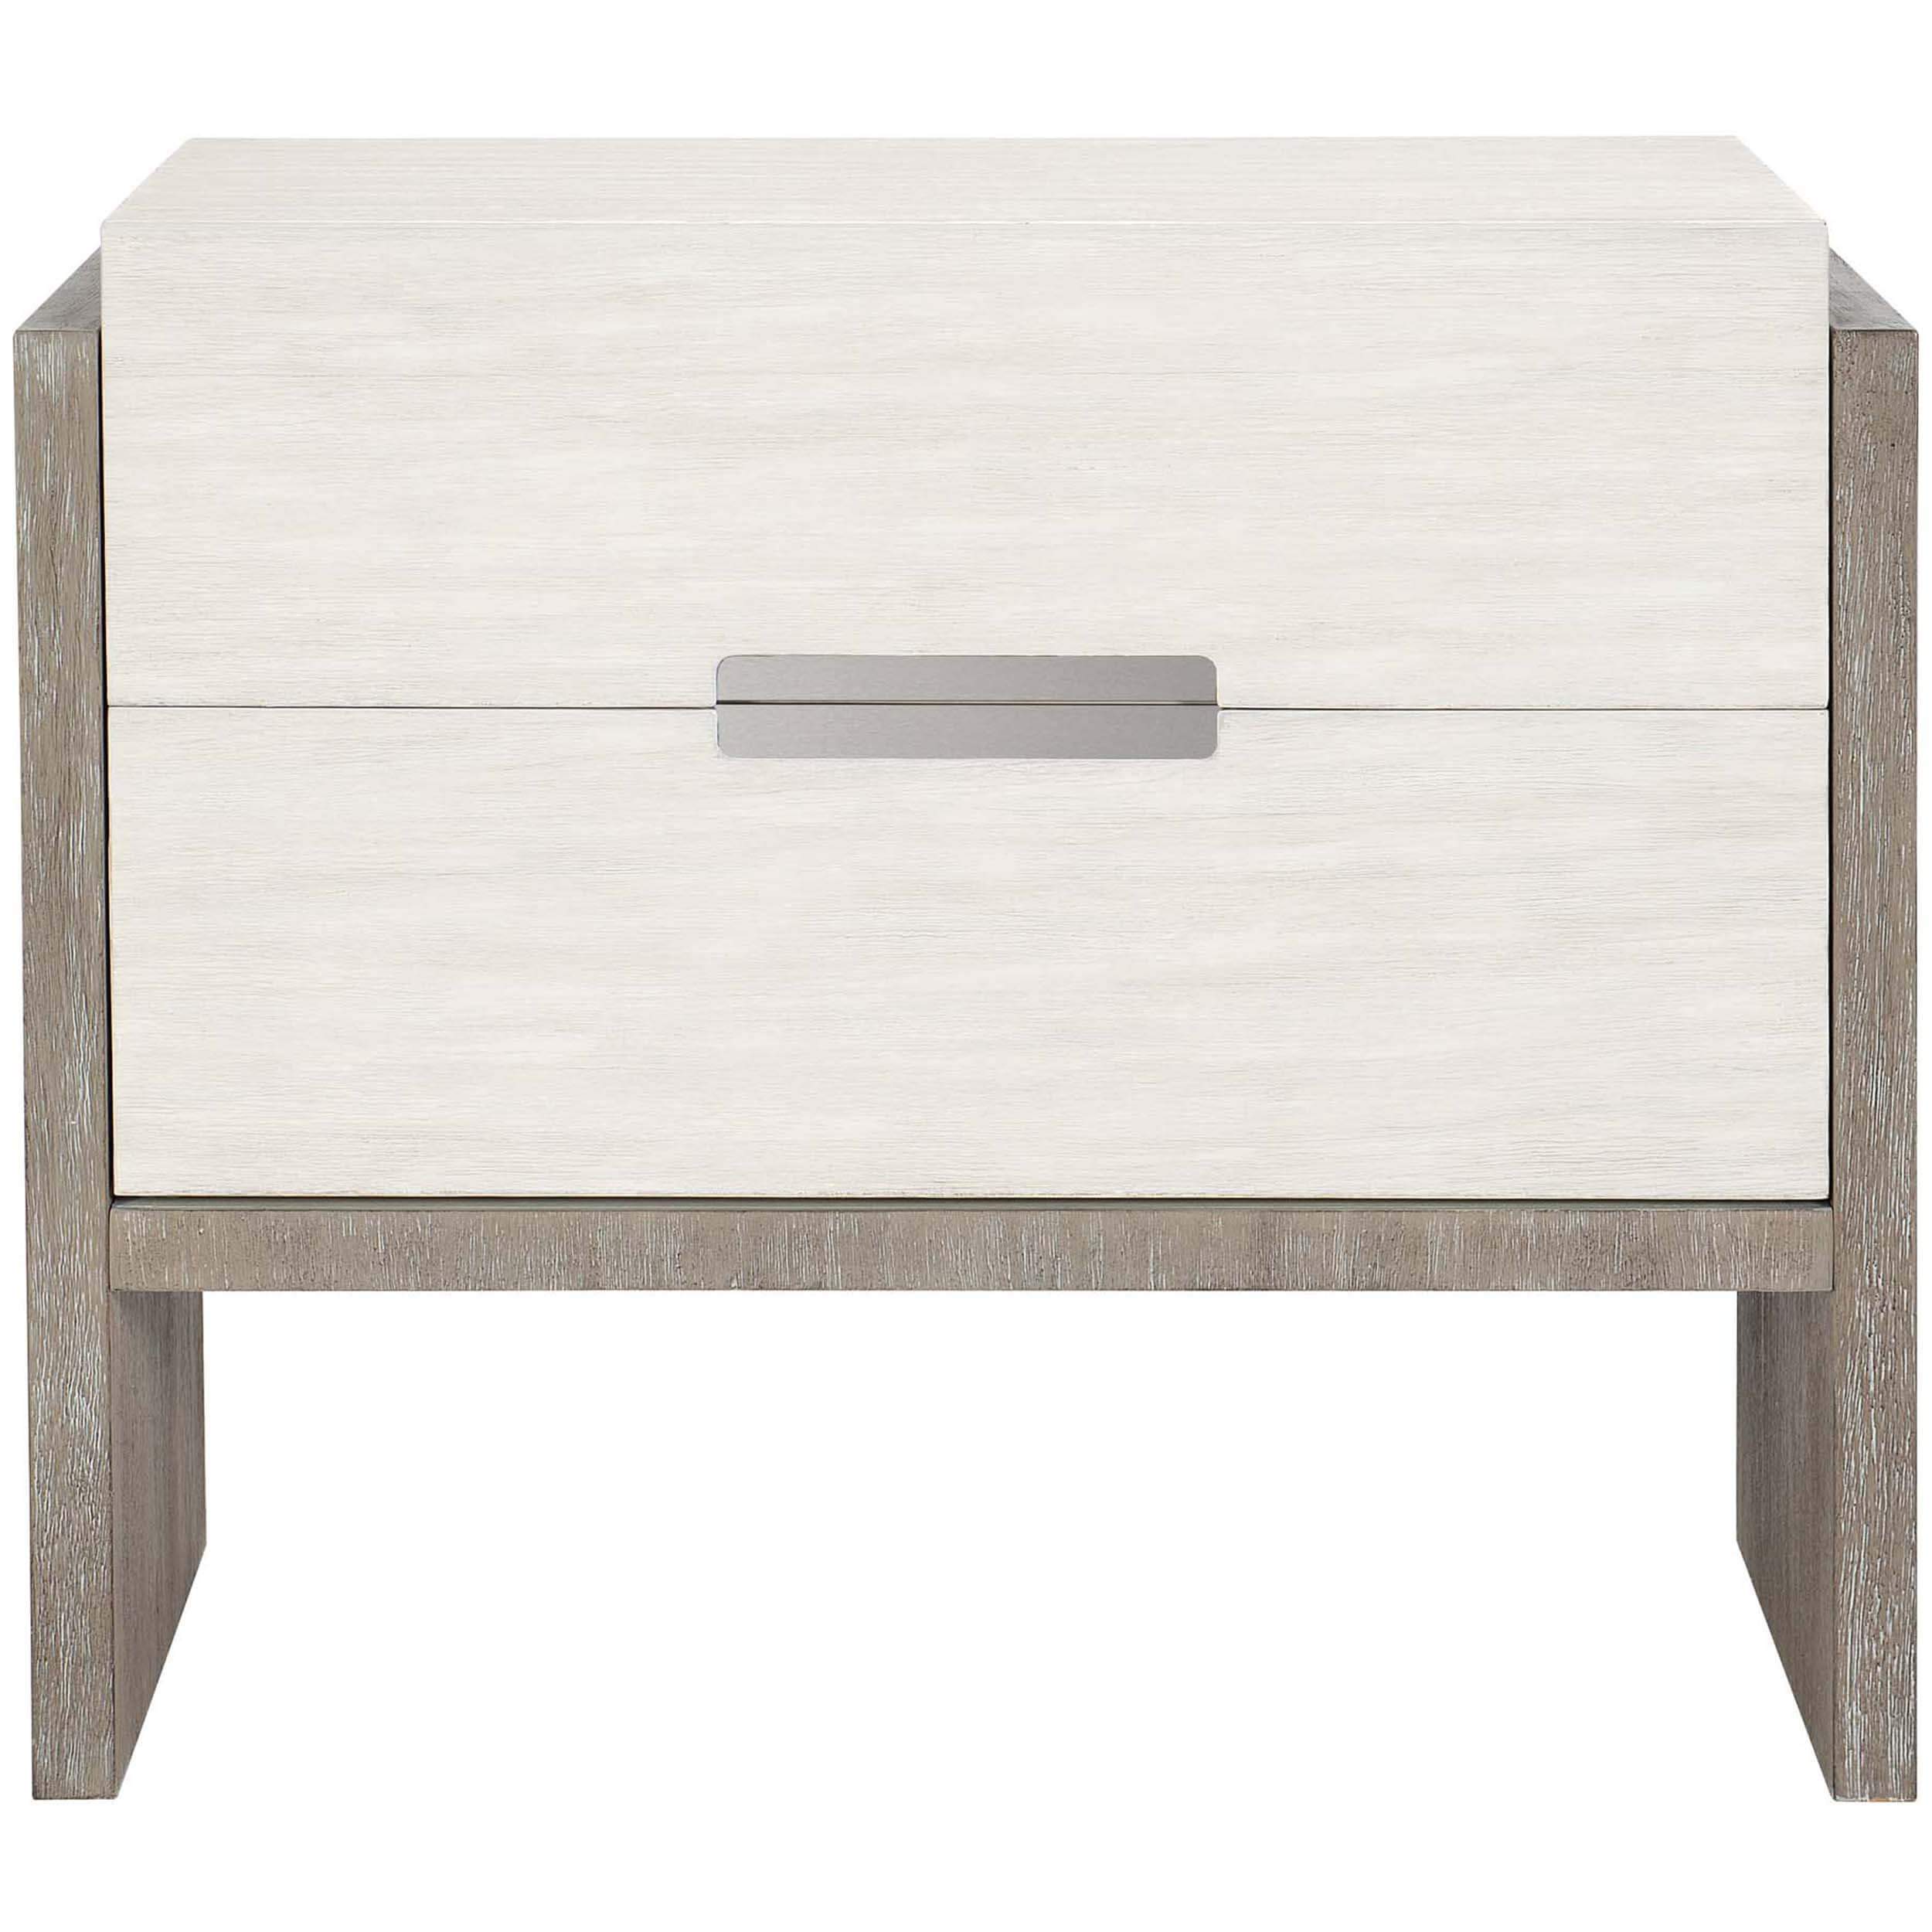 Image of Foundations 2 Drawer Nightstand